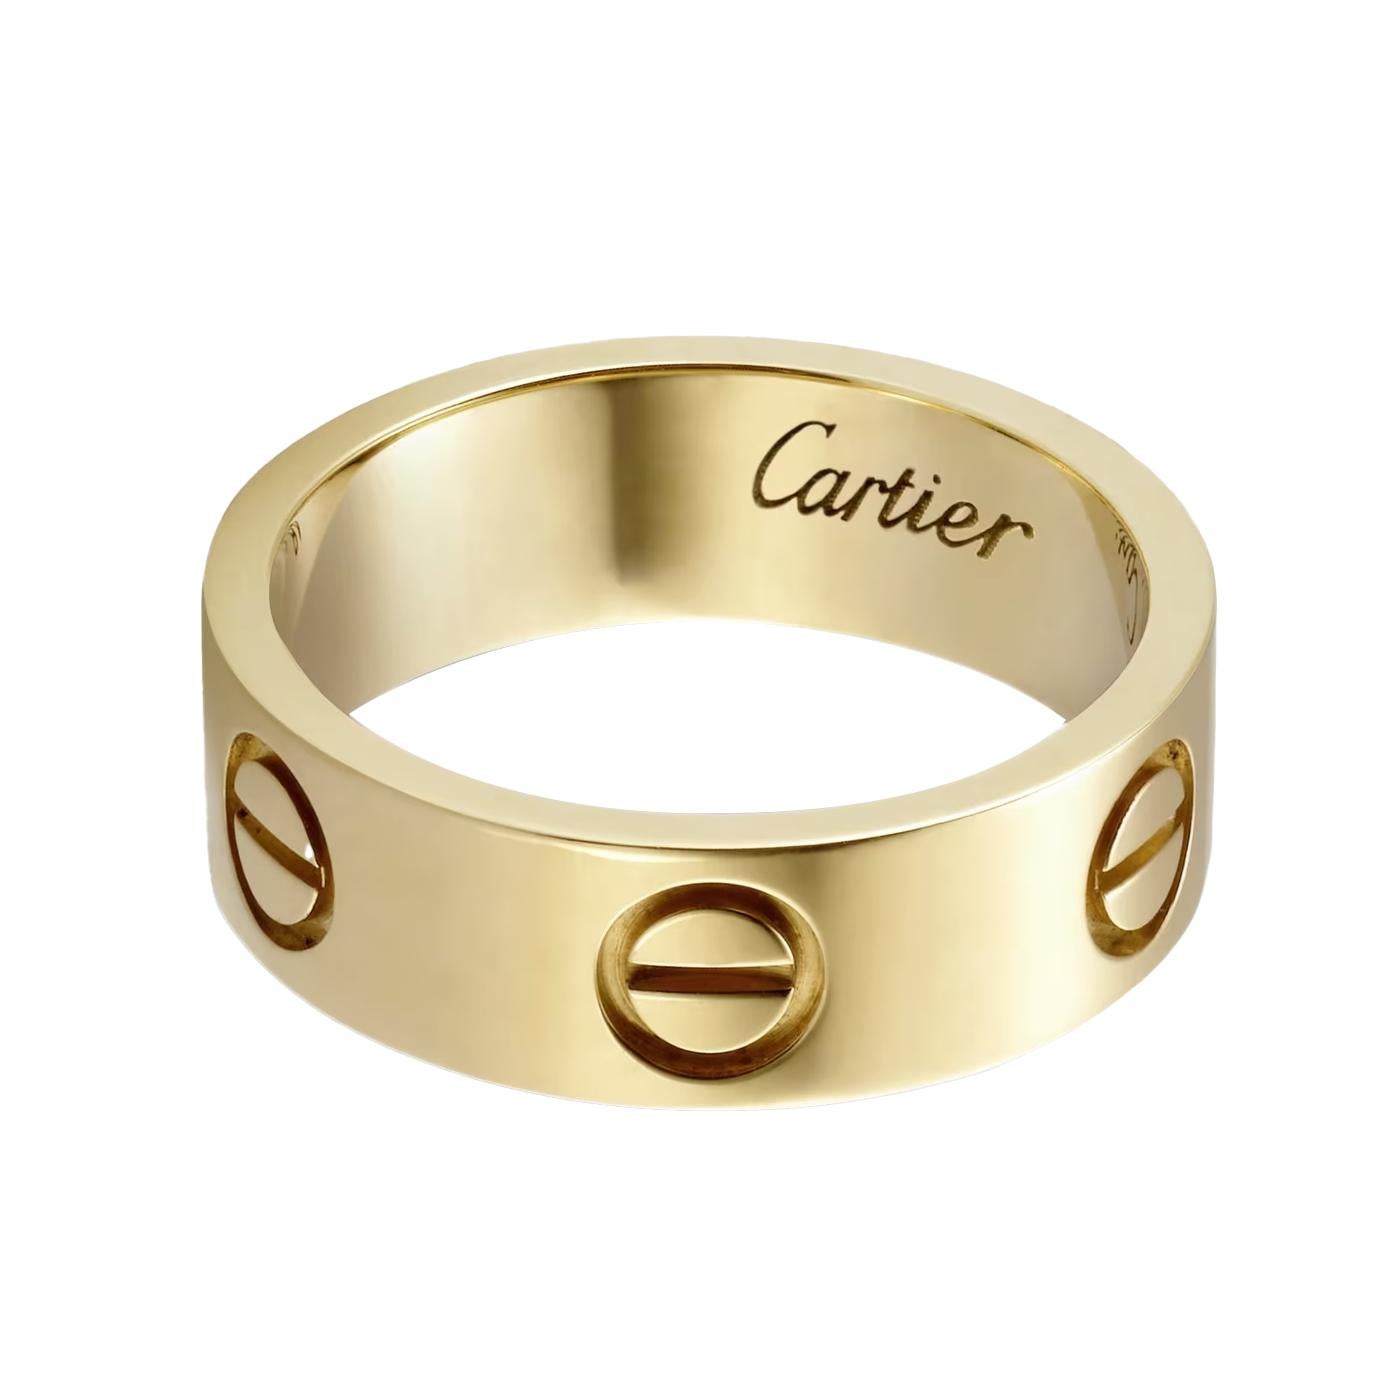 LOVE ring, 18K yellow gold (750/1000). Width: 5.5 mm (for size 50).

Details:
Brand: Cartier
Style: Love Ring
Material: 18K Yellow Gold
Cartier Size: 50 (USA Size 5.5)
Theme: Romantic, Love
Scope of Delivery: Box and Papers
Purchased: